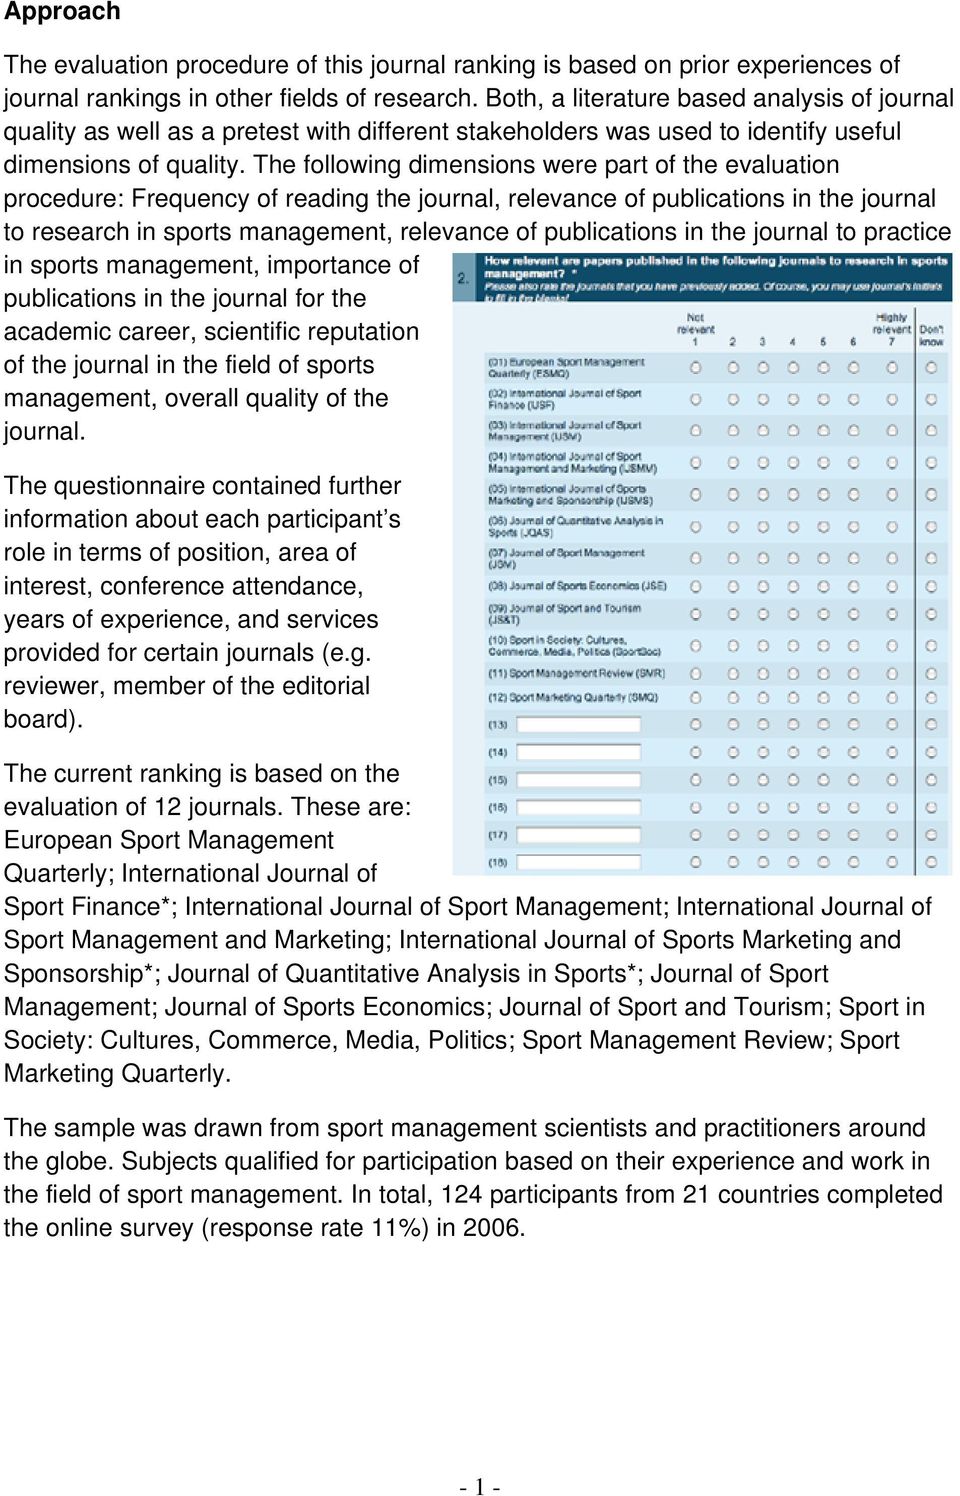 The following dimensions were part of the evaluation procedure: Frequency of reading the journal, relevance of publications in the journal to research in sports management, relevance of publications